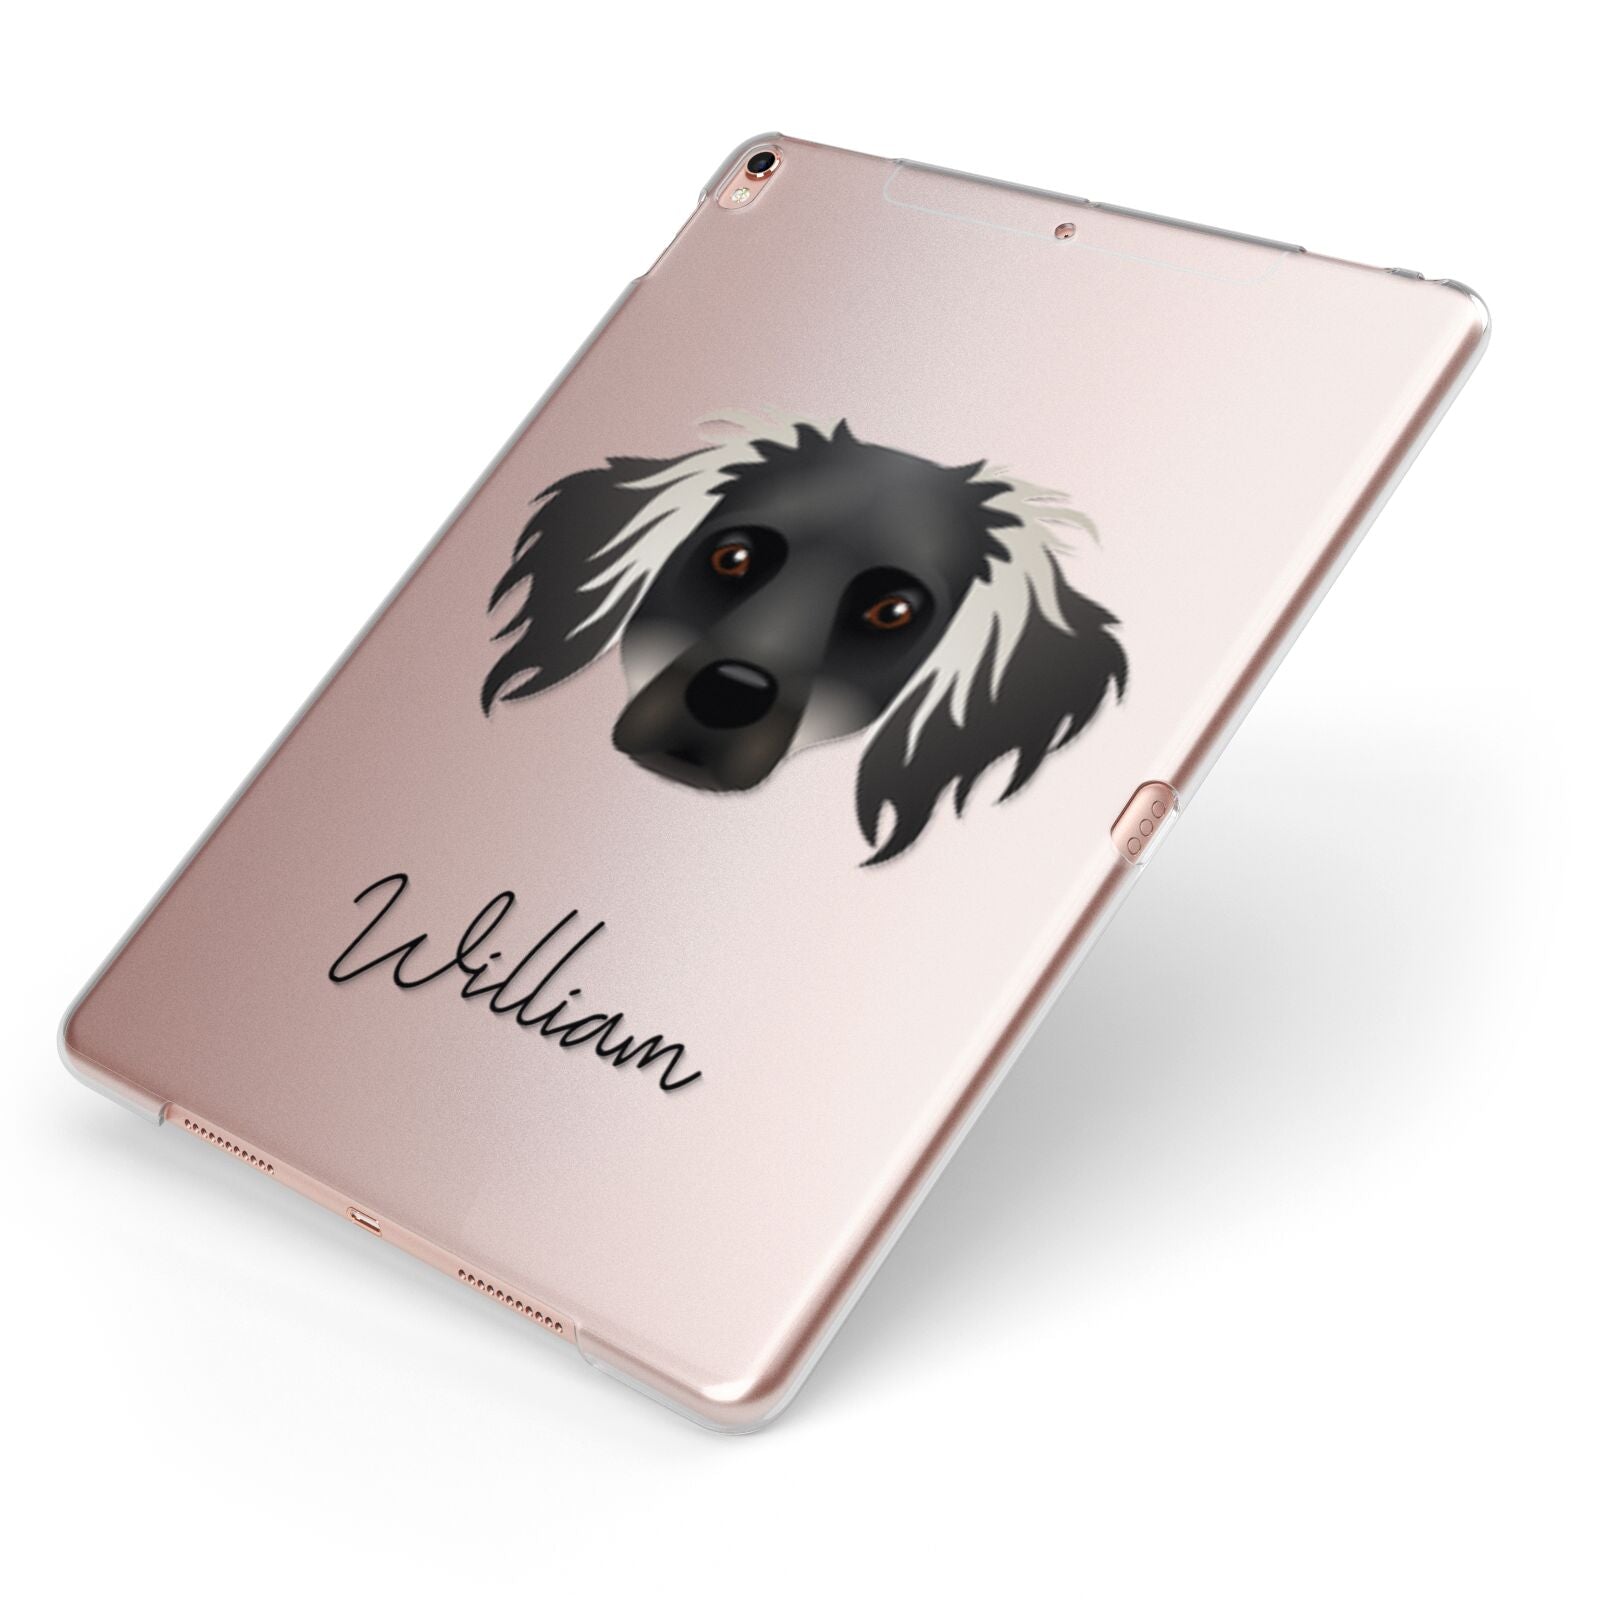 Dameranian Personalised Apple iPad Case on Rose Gold iPad Side View